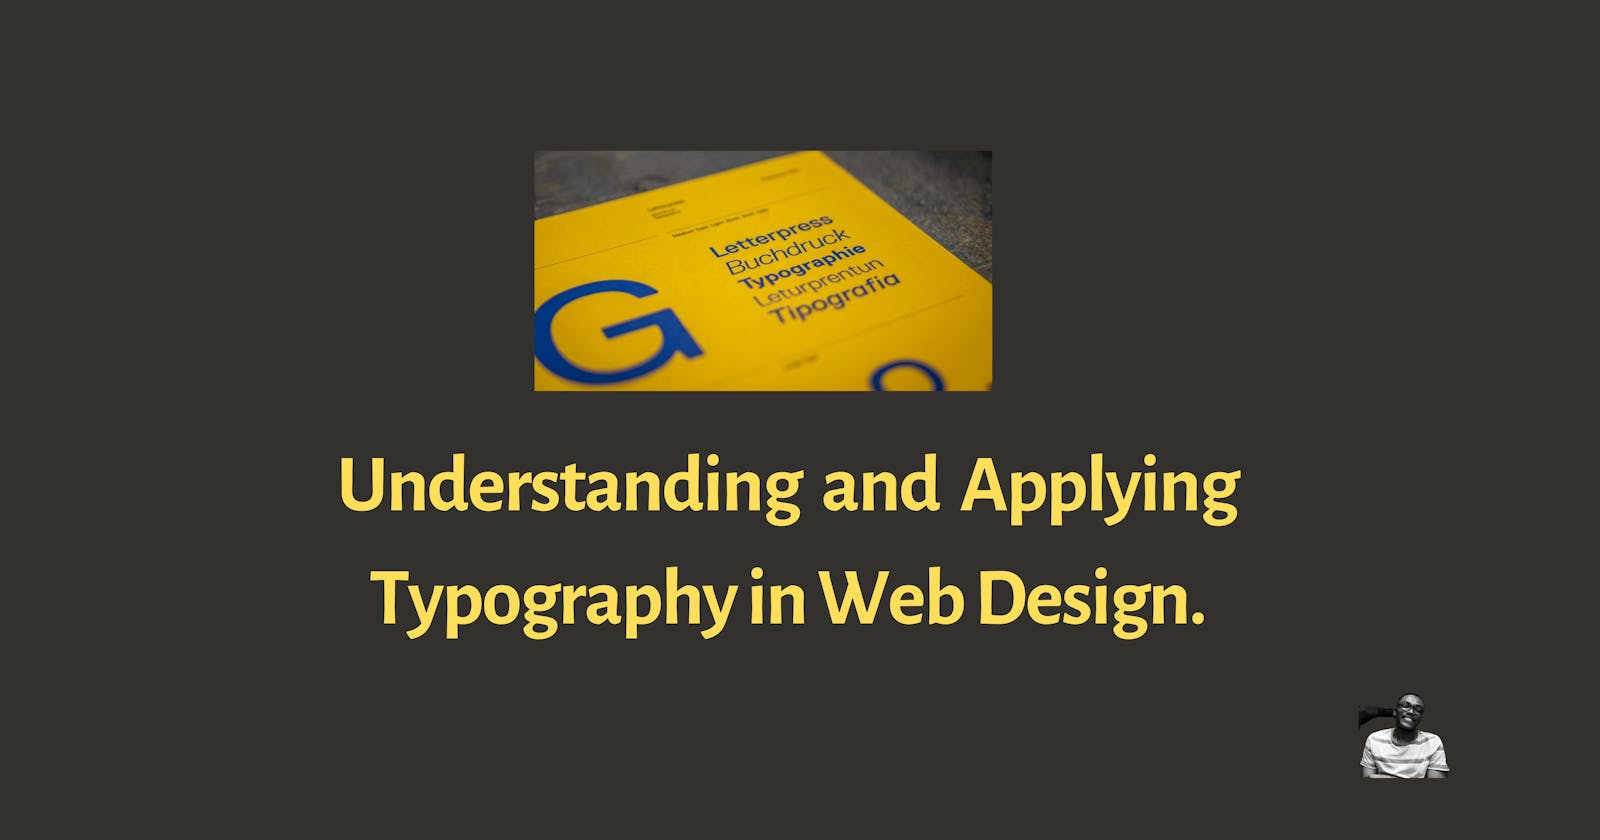 Web Design 101: Typography and how to use it to your advantage.